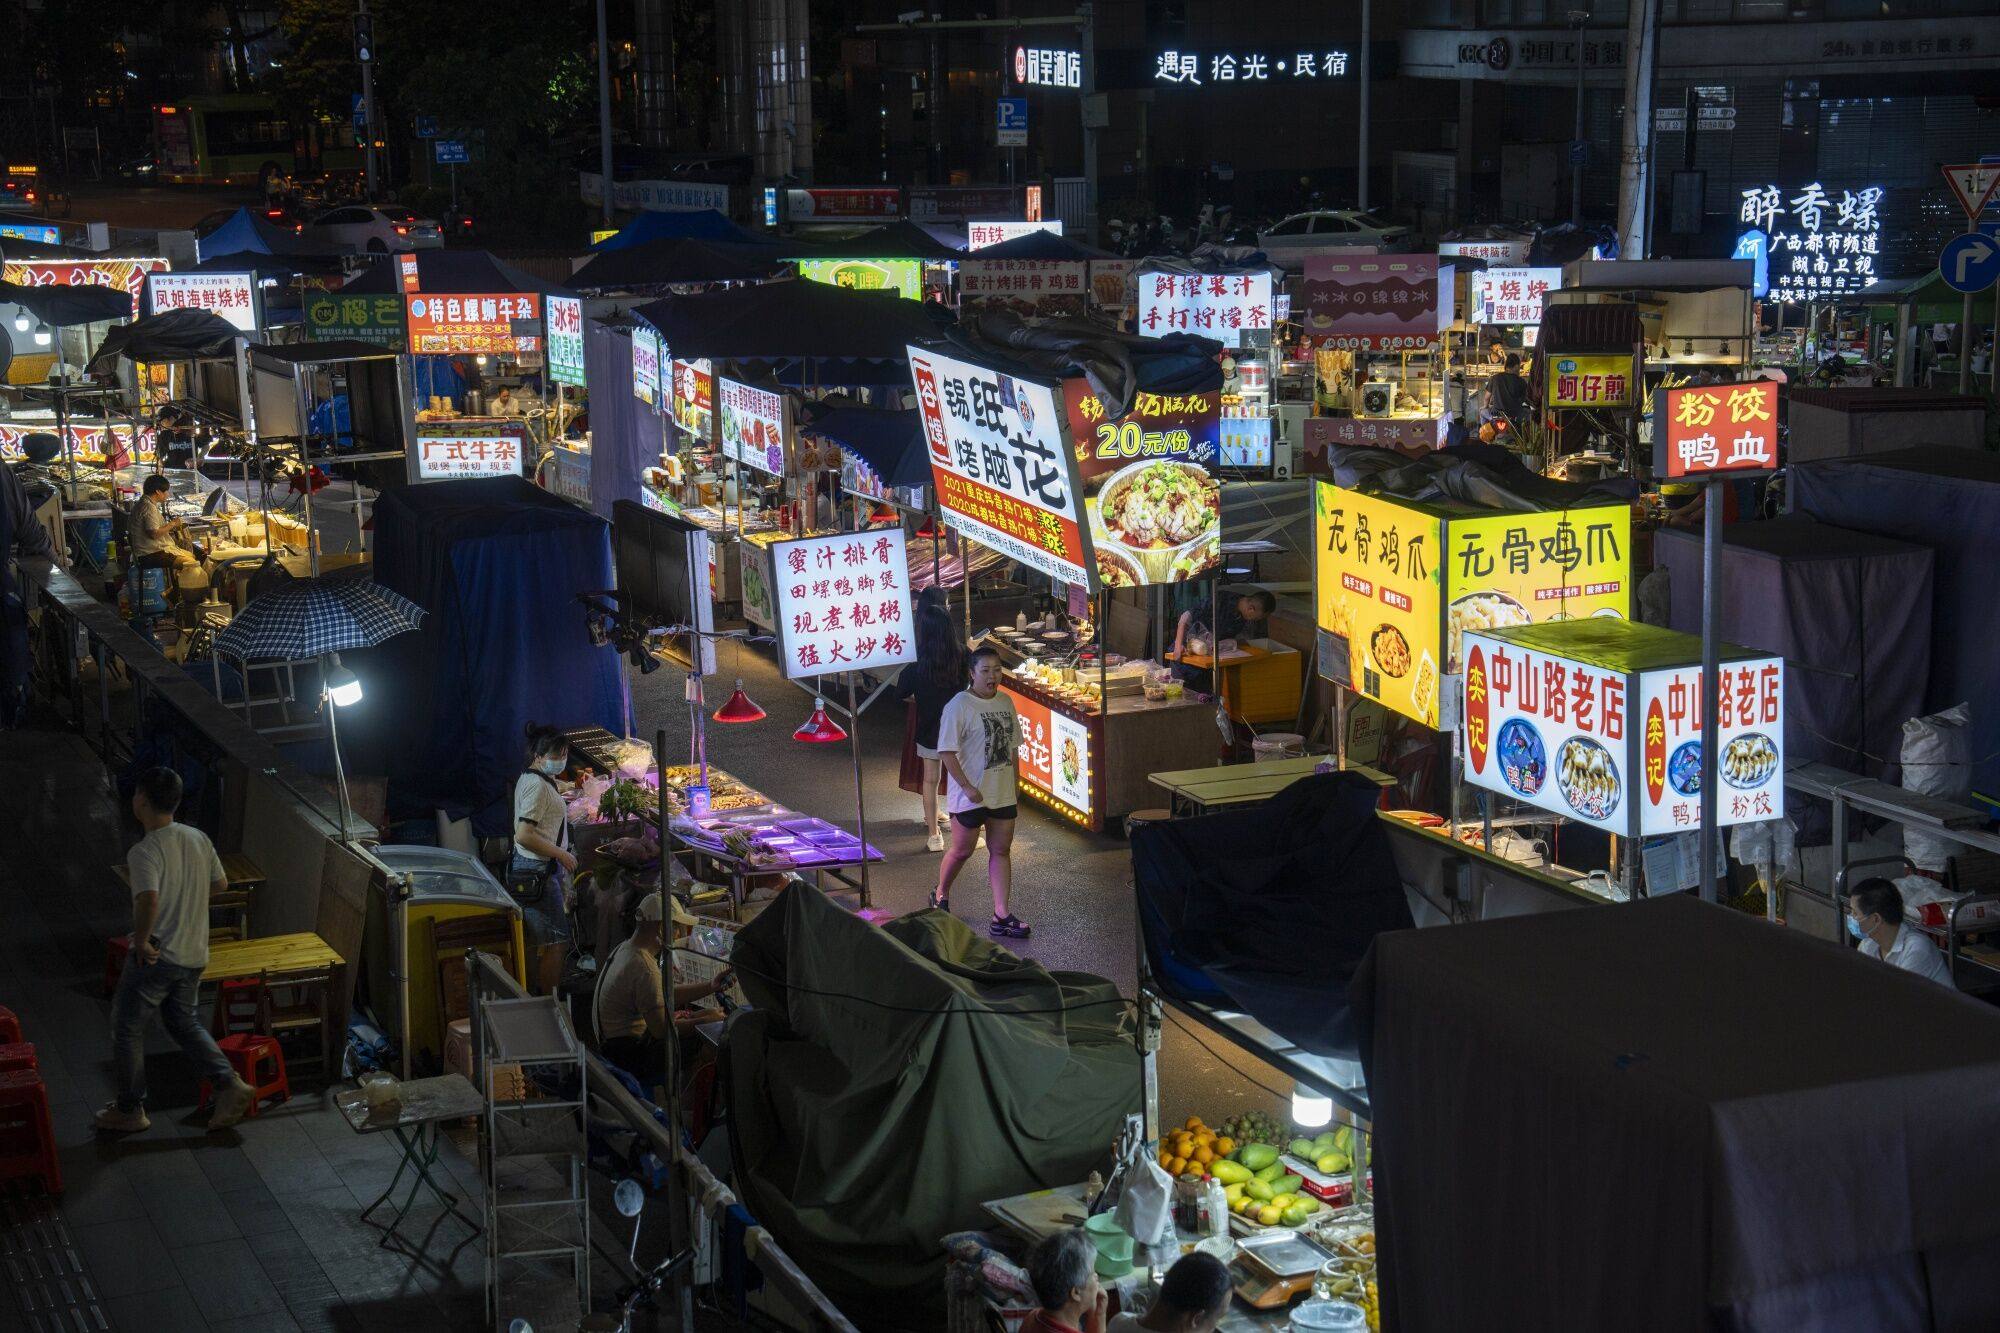 A shopper walks past food stalls at a night market in Nanning, China, on May 13. The Chinese economy is stabilising, which from a market standpoint is an important signal that the worst of the downturn is over. Photo: Bloomberg 